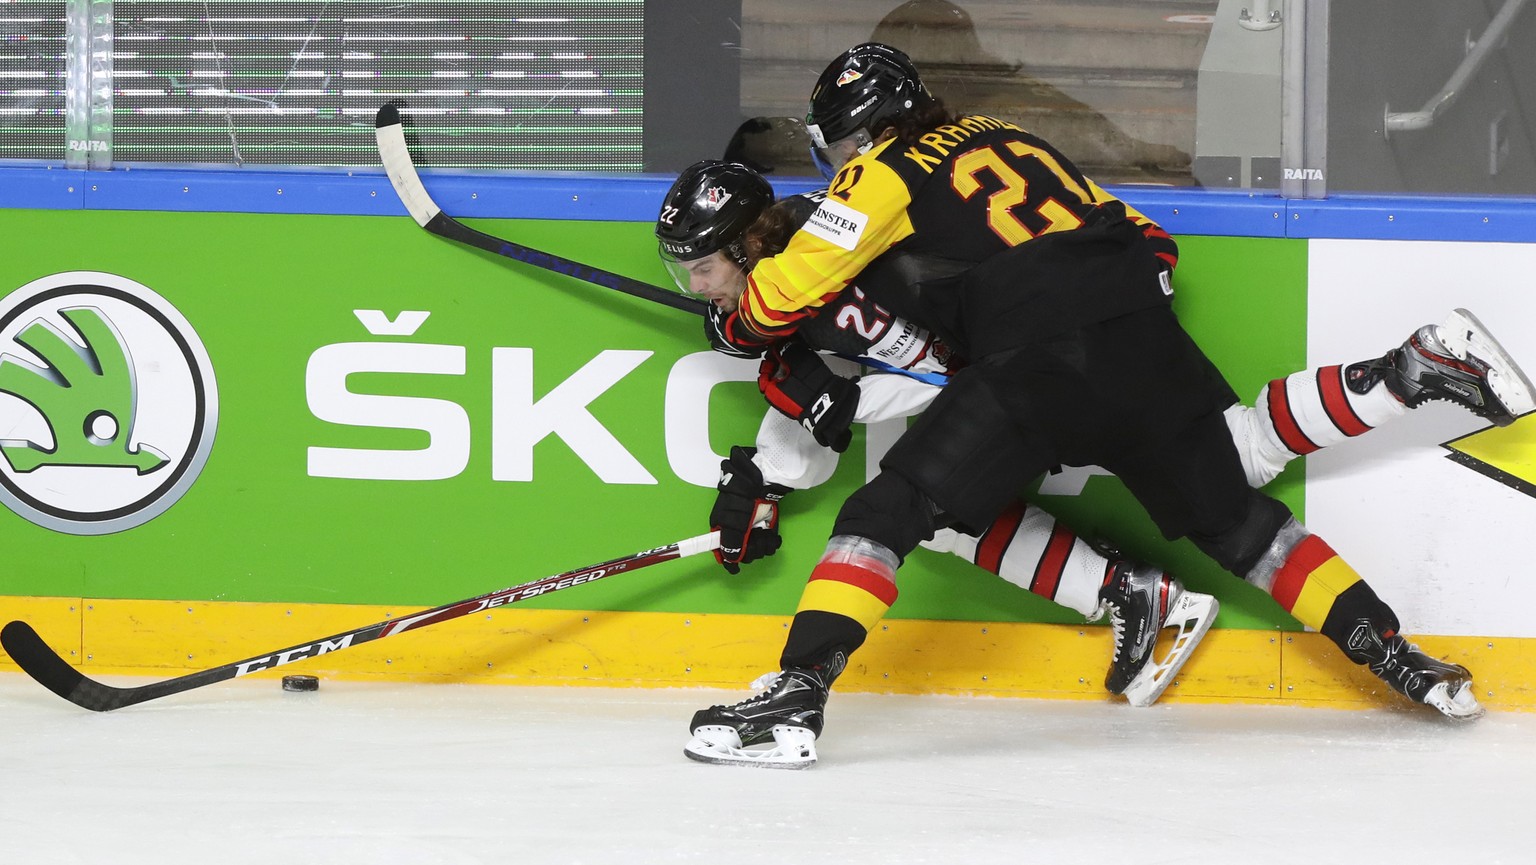 Canada&#039;s Brandon Hagel, left, challenges for the puck with Germany&#039;s Nikolas Krammer during the Ice Hockey World Championship group B match between Germany and Canada at the Arena in Riga, L ...